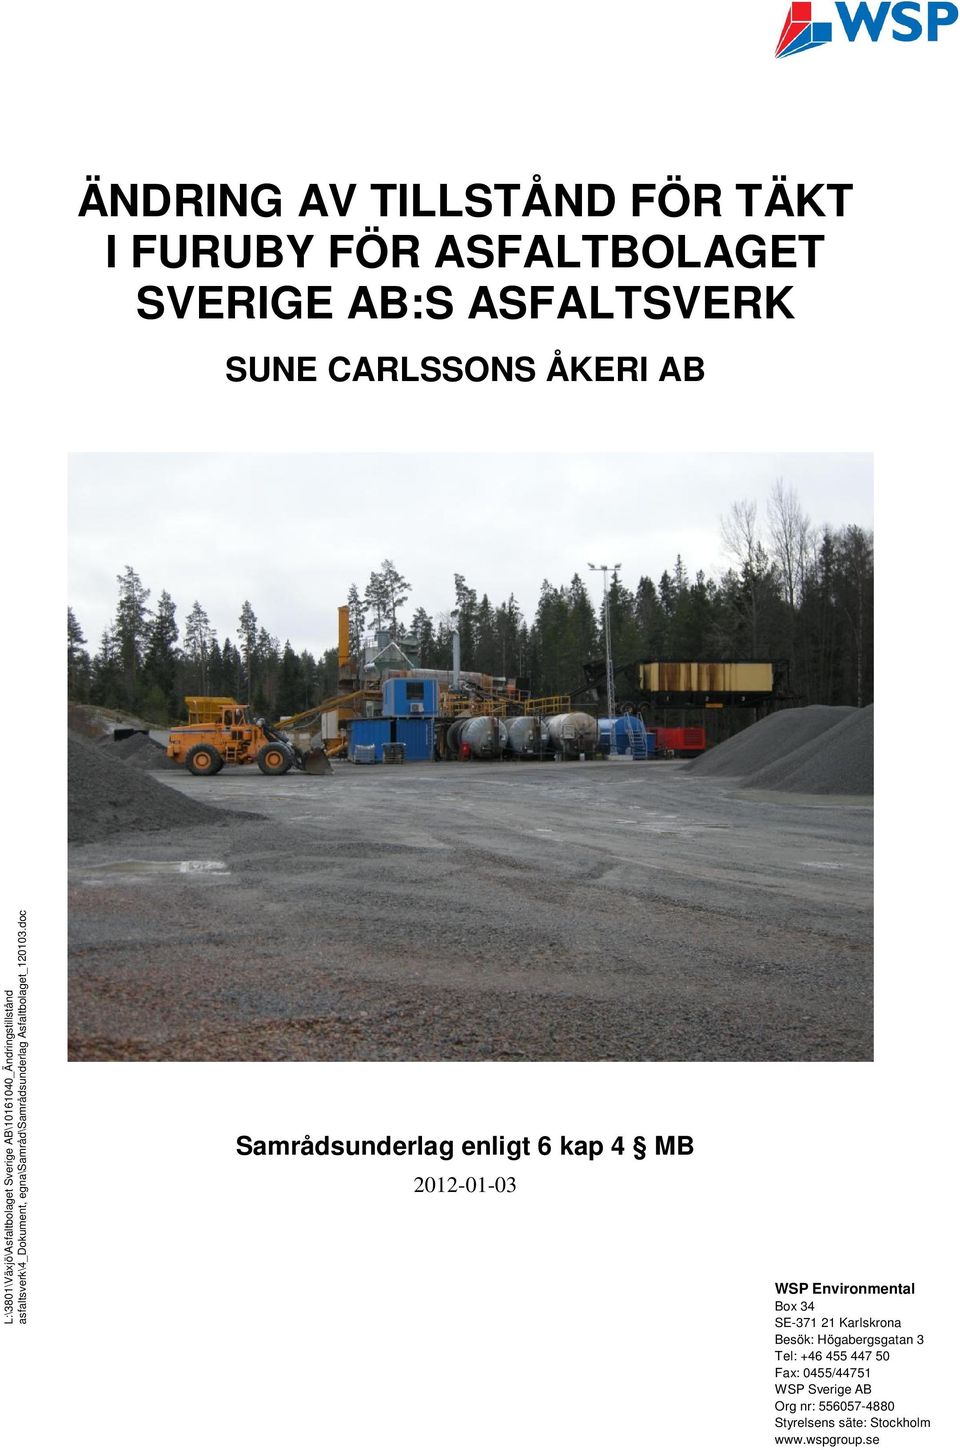 Asfaltbolaget_120103.doc Mall: Rapport - 2003.dot ver 1.